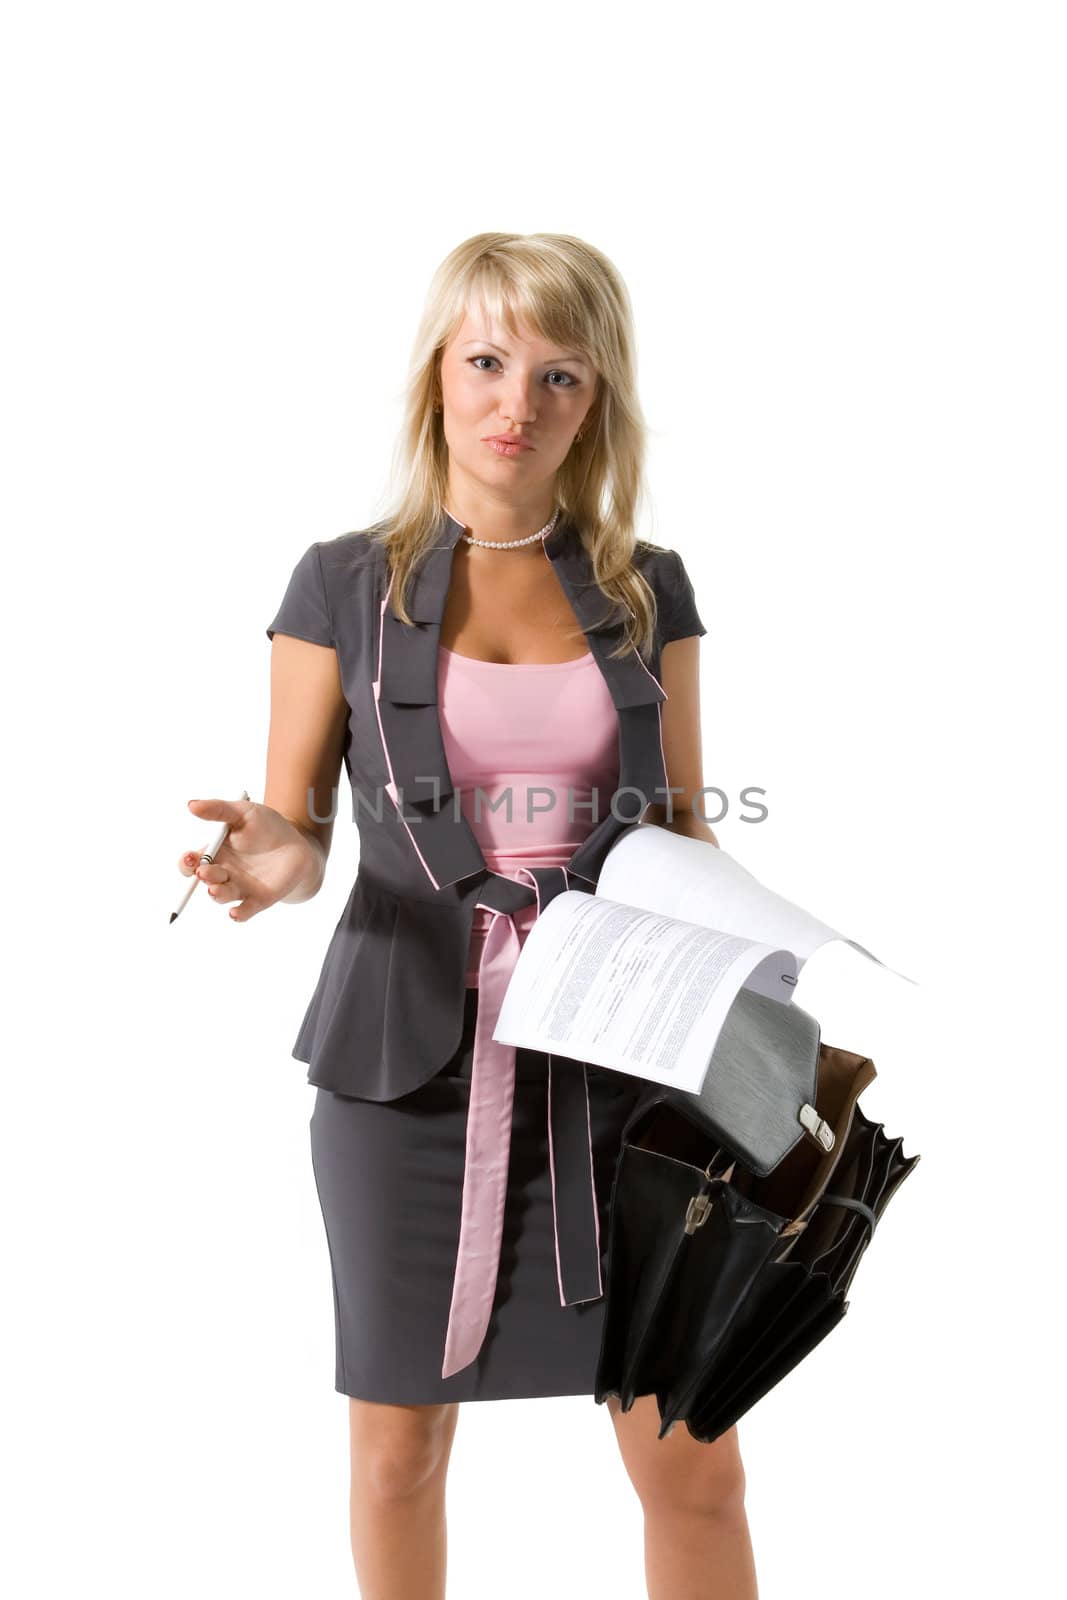 businesswoman with documents and briefcase by aptyp_kok